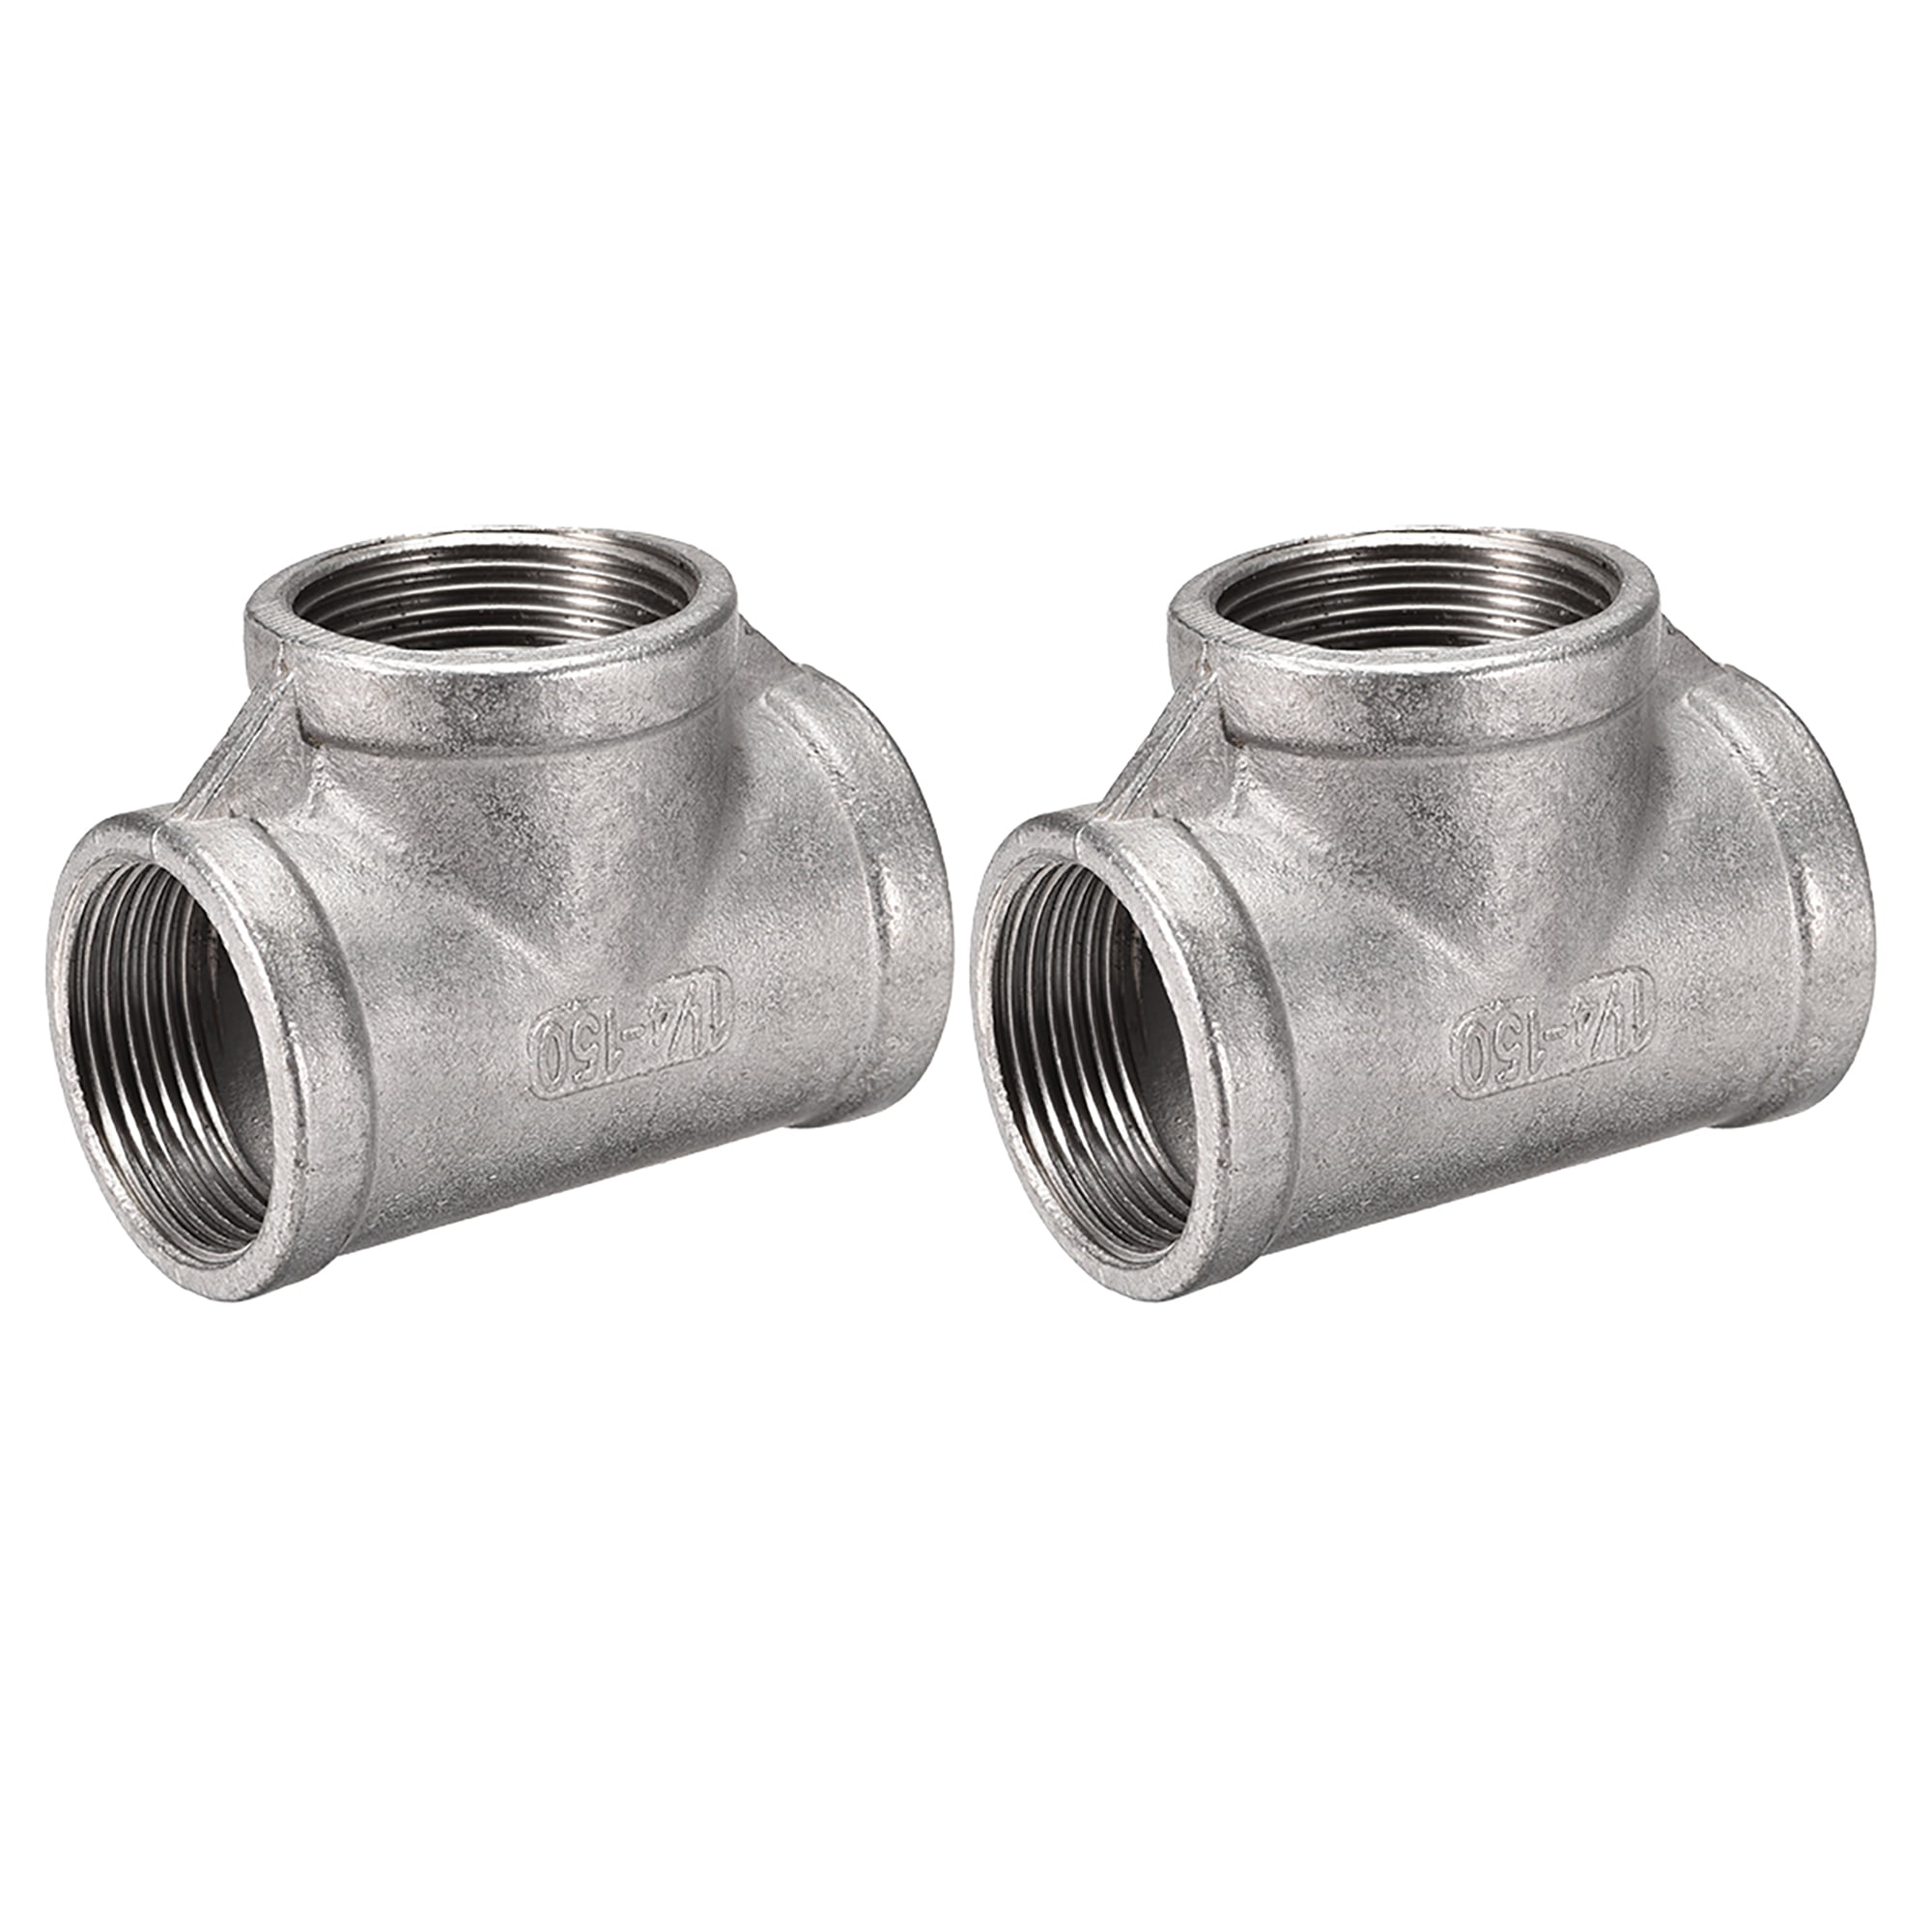 Stainless Steel 304 Cast Pipe Fitting Tee 1" NPT Class 150 